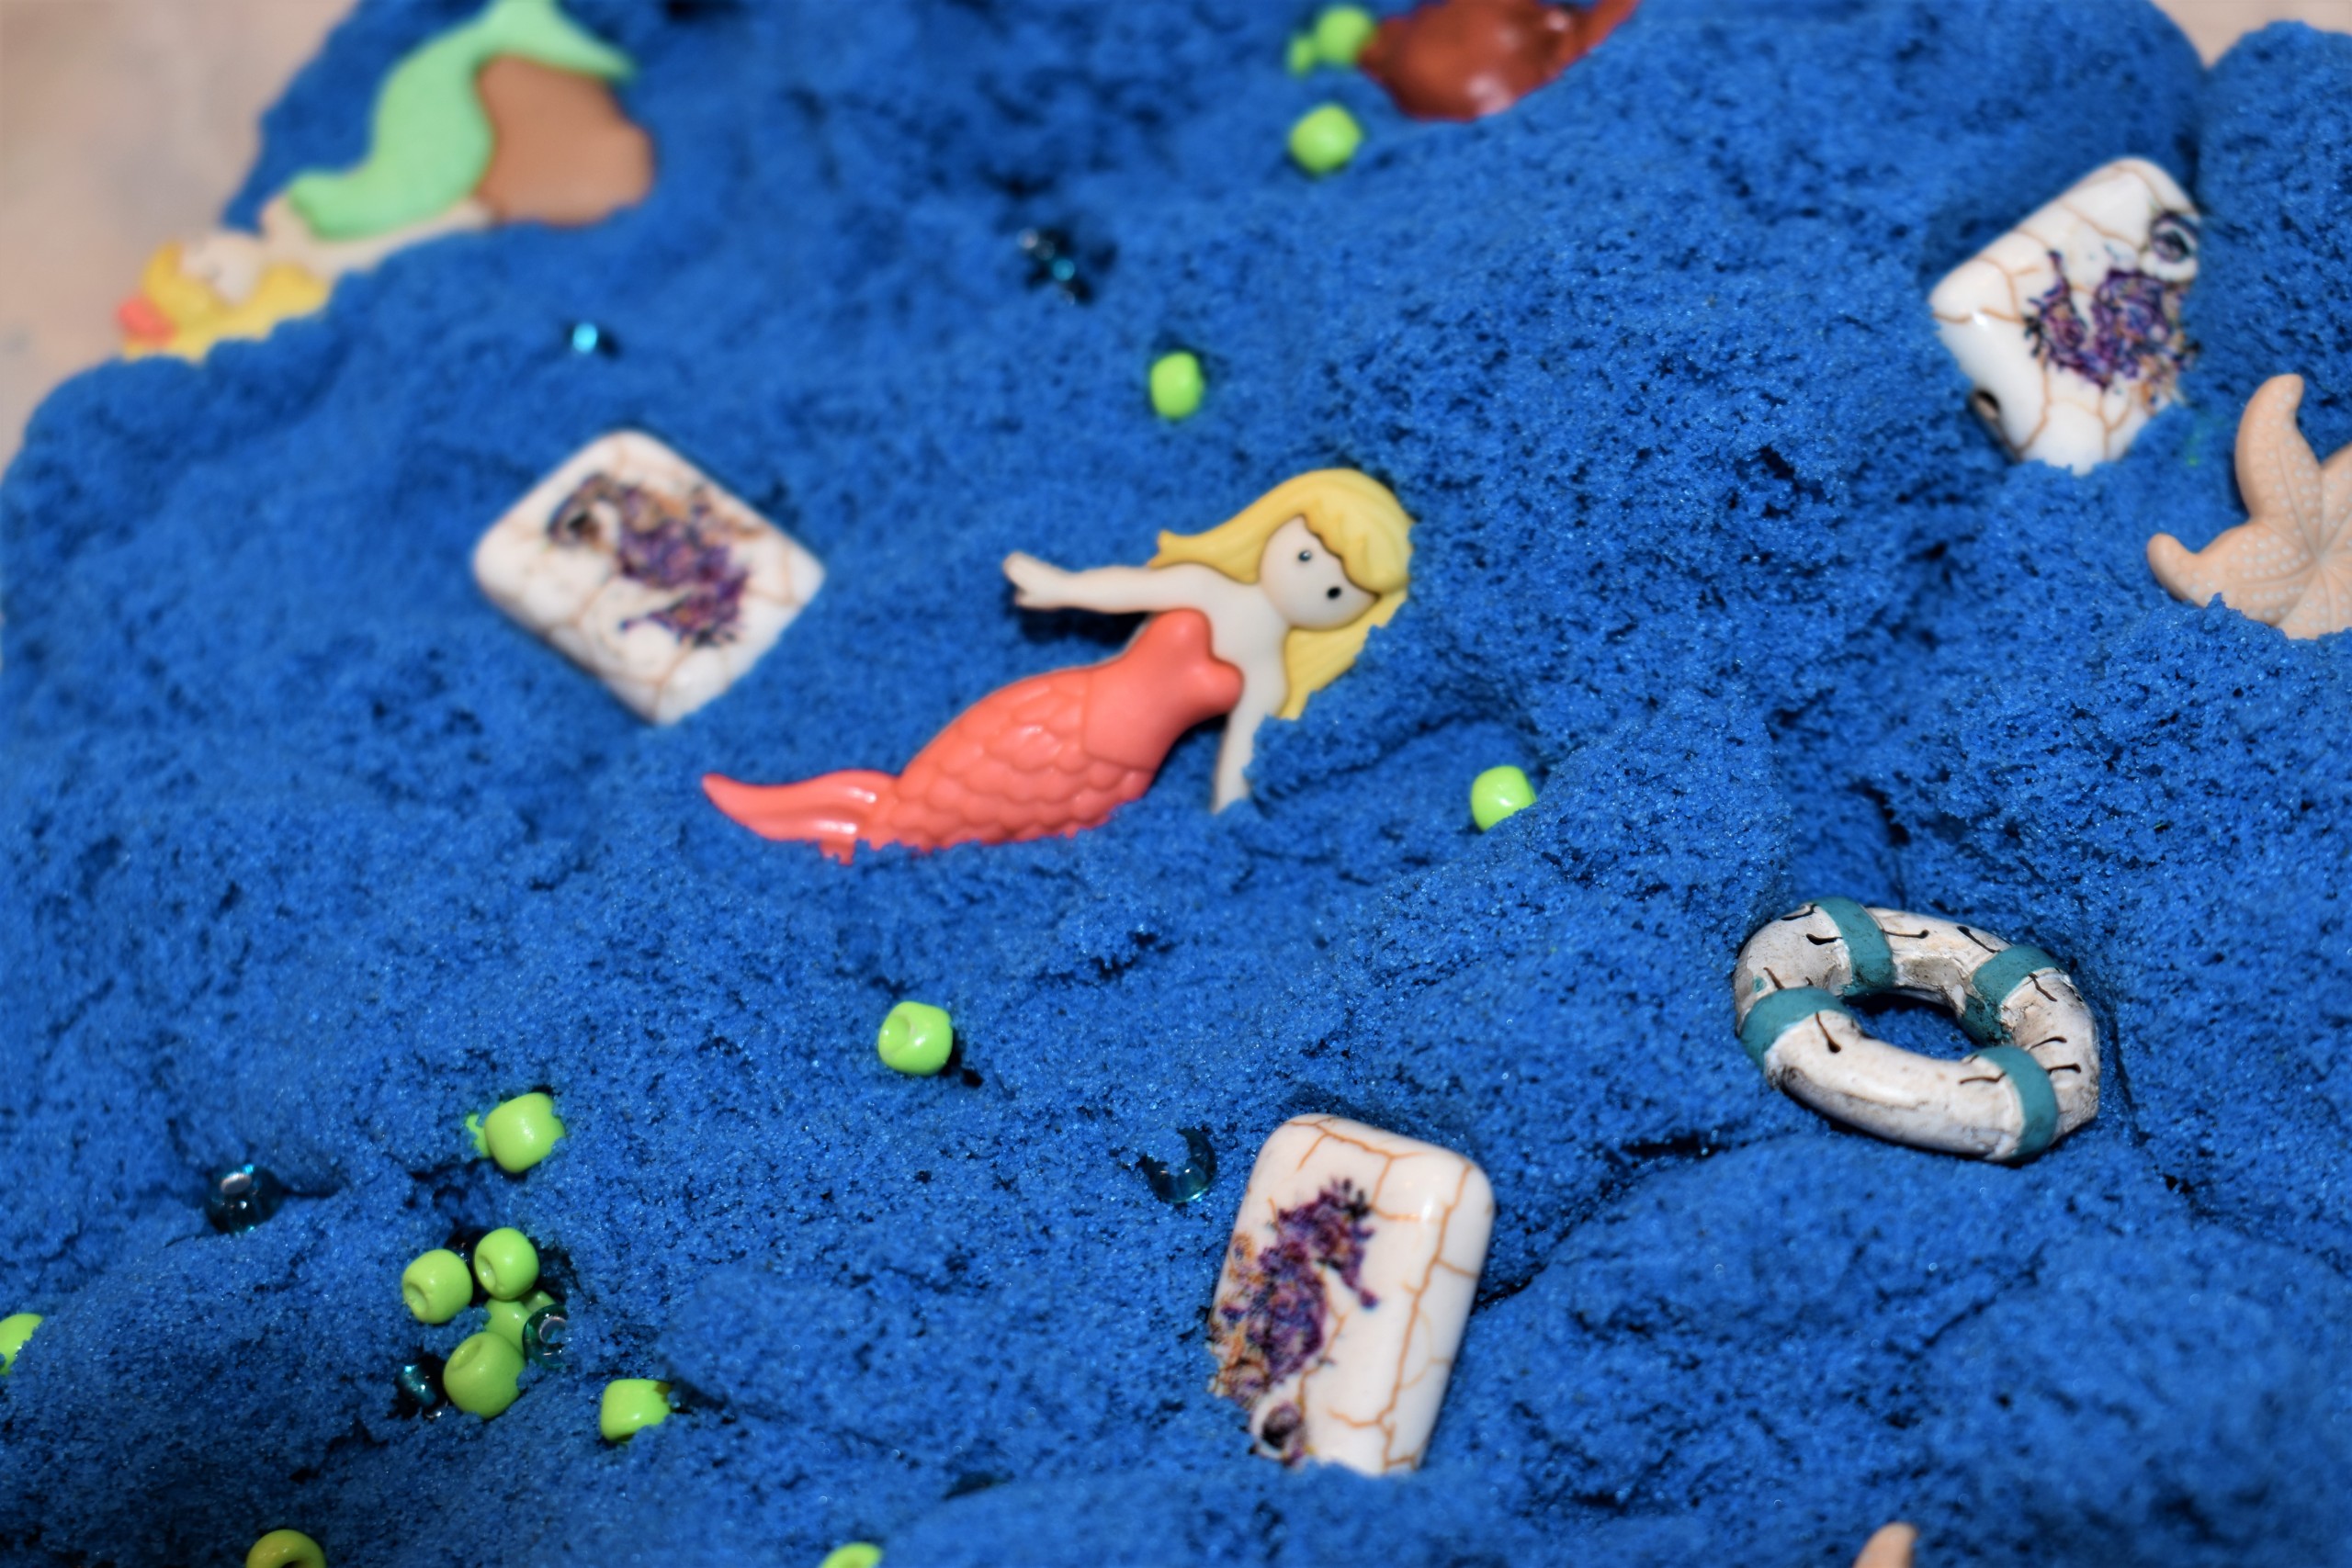 A plastic bin filled with blue kinetic sand has various beach themed objects inside.